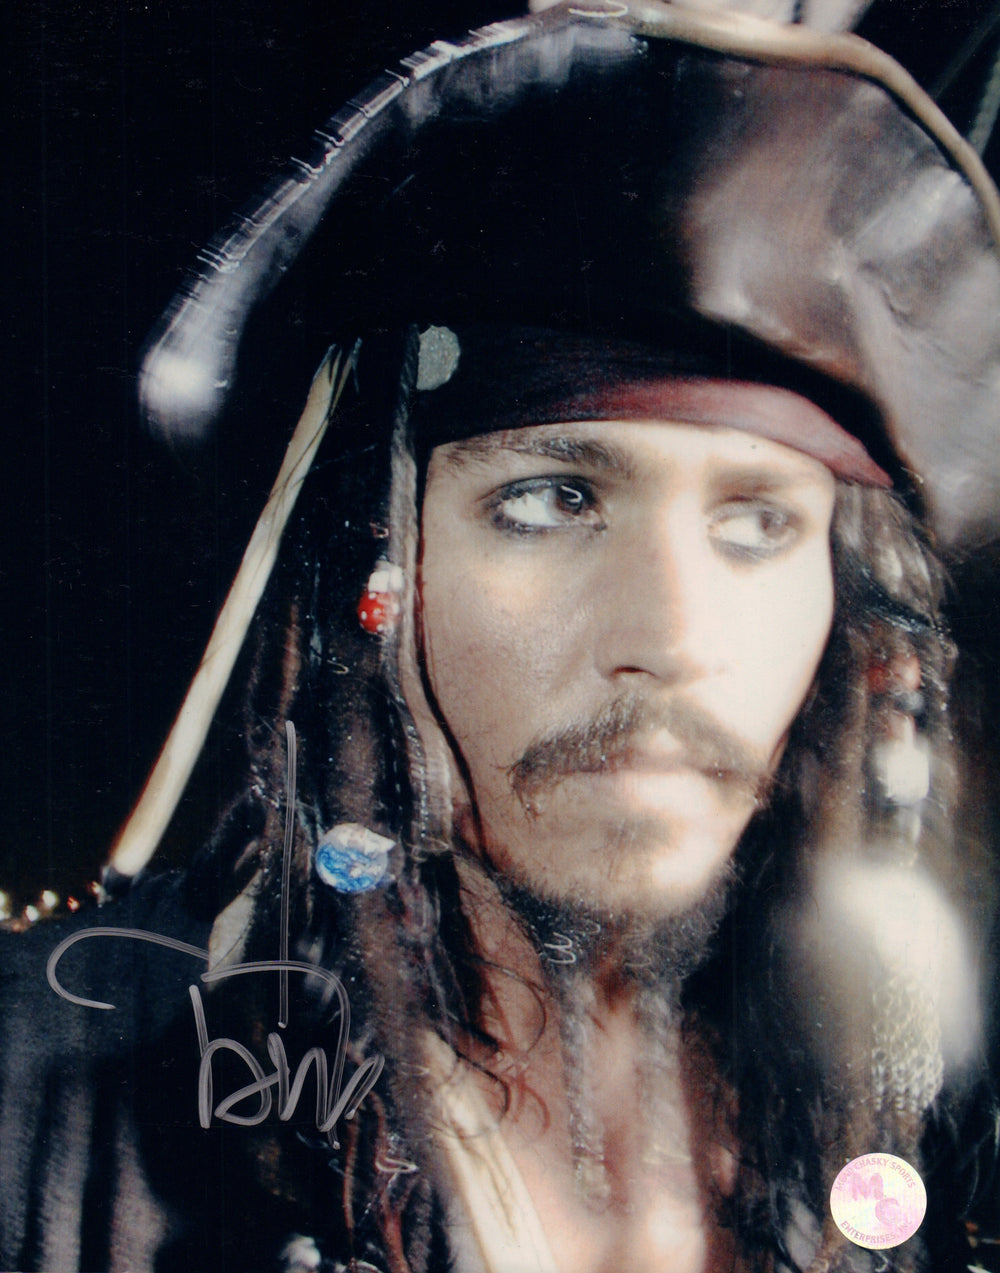 Johnny Depp as Captain Jack Sparrow in Pirates of the Caribbean Signed 8x10 Photo